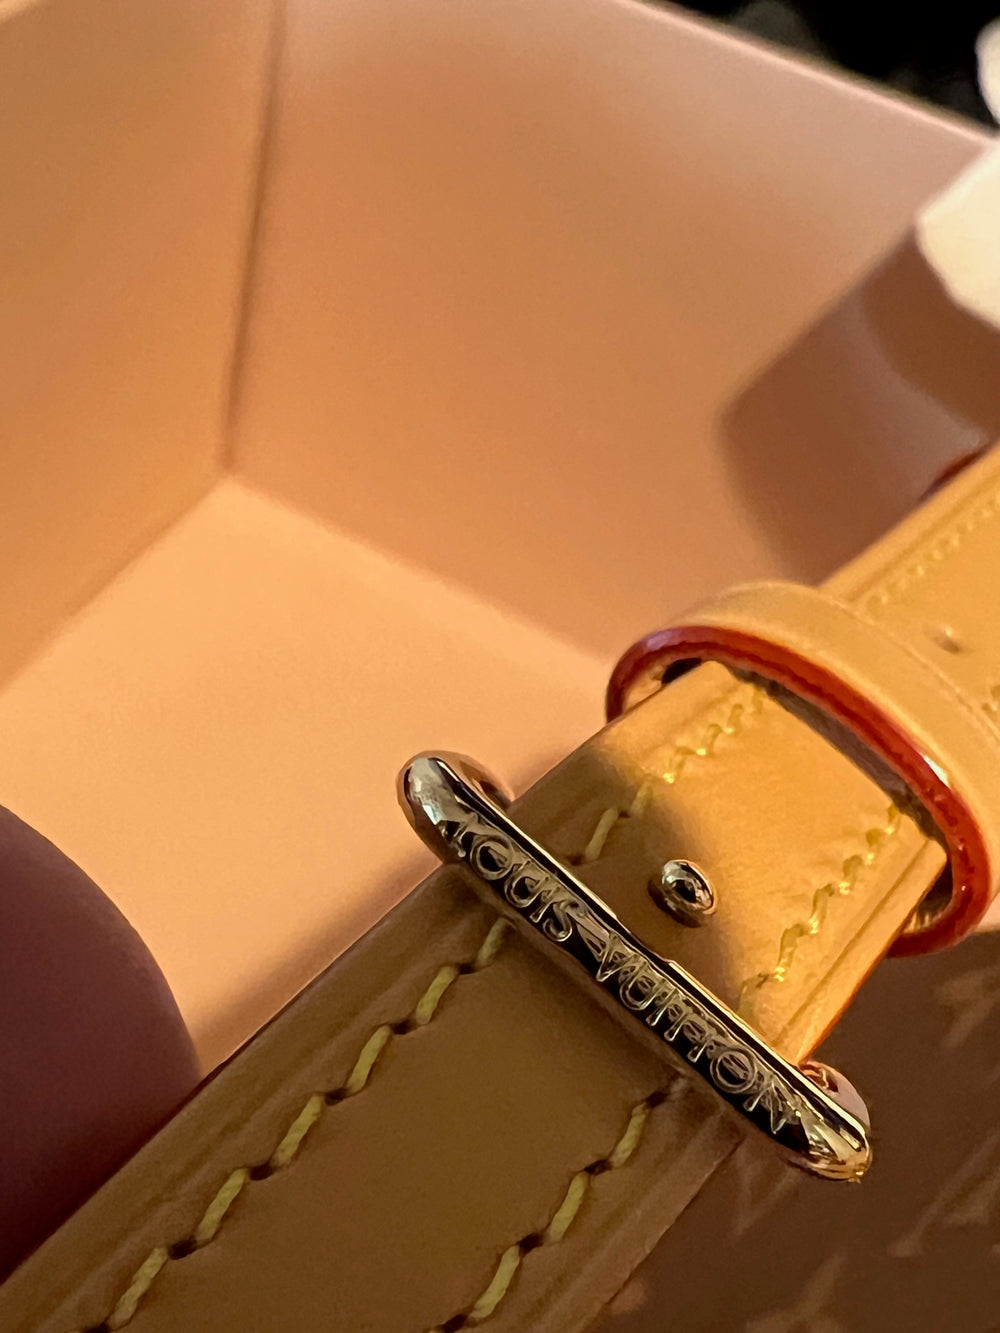 WAYS to use GOLD CHAIN STRAP from LOUIS VUITTON Mini BumBag, Jewelry PIECE, STRAP